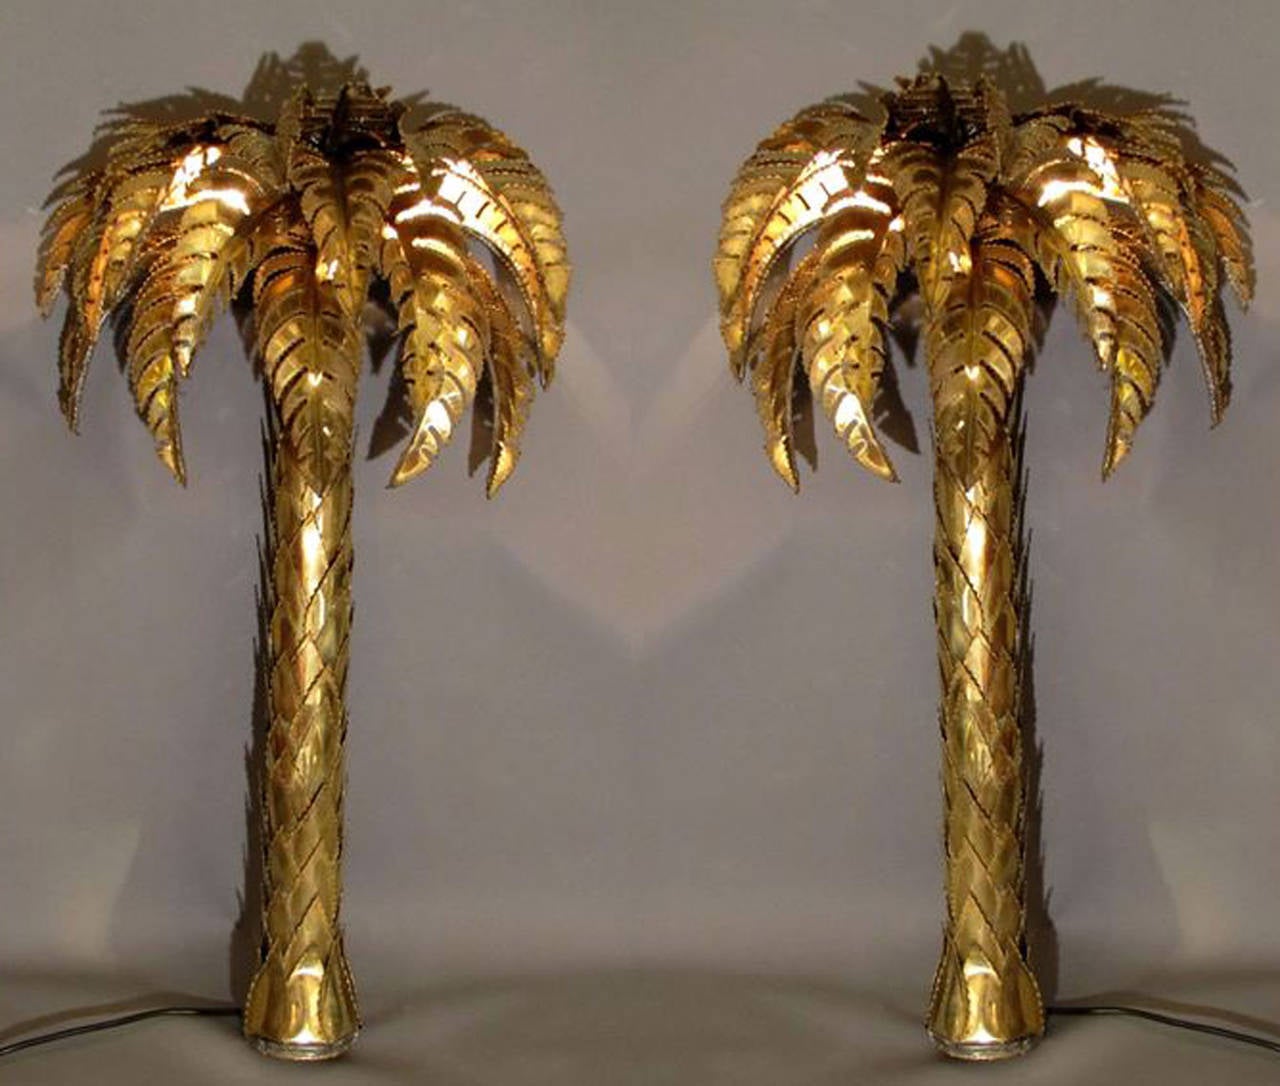 Beautiful pair of 1970s palm tree wall lights in hand-worked and polished brass.